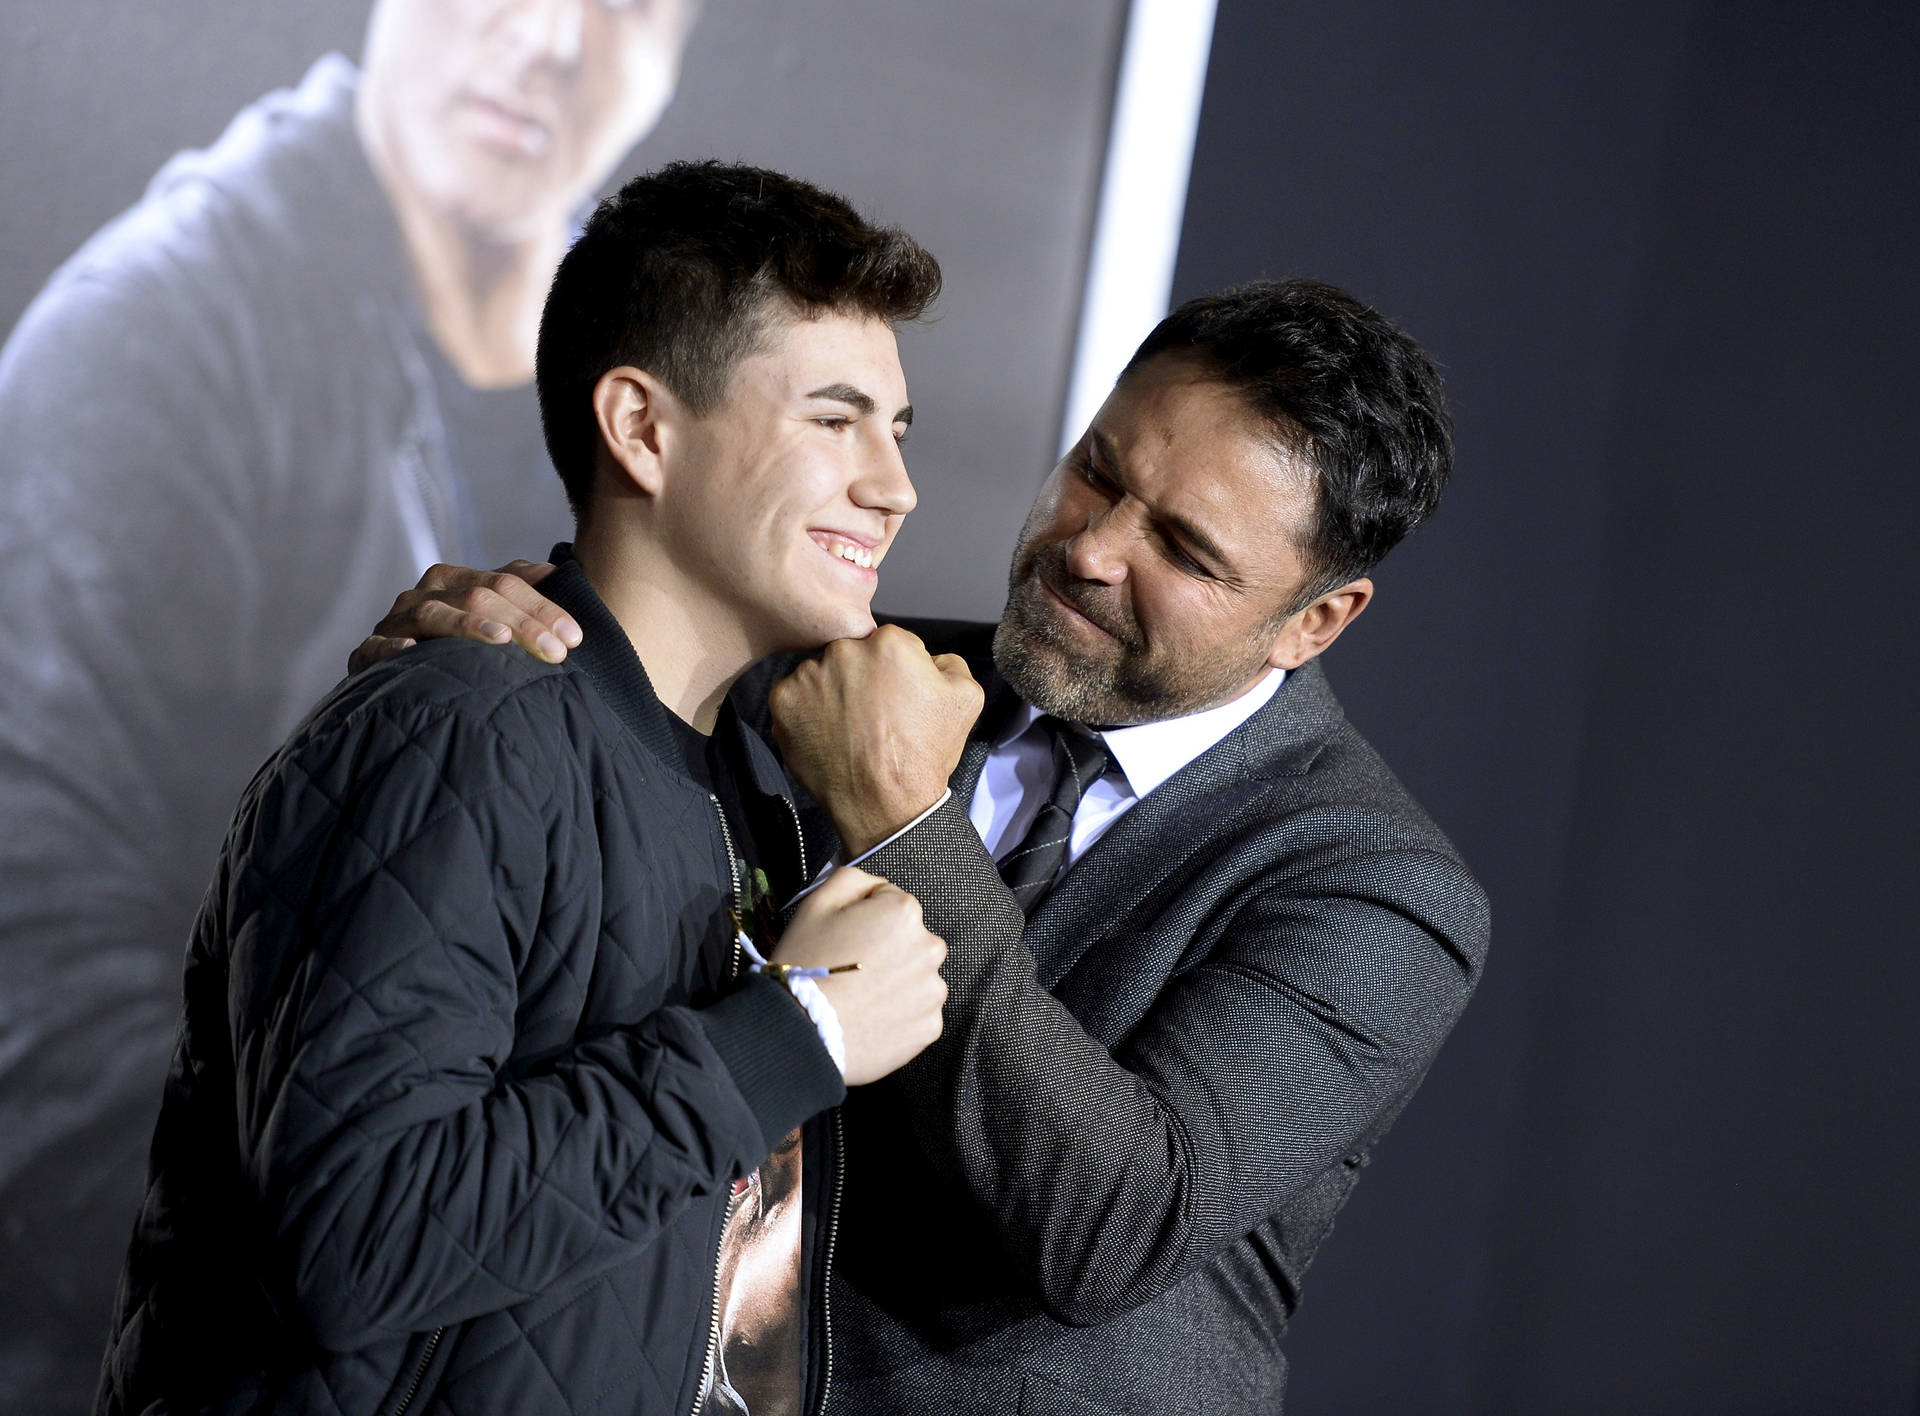 Oscarde La Hoya Med Son - This Would Be Appropriate As A Caption For A Computer Or Mobile Wallpaper Featuring A Photo Of Oscar De La Hoya And His Son. Wallpaper